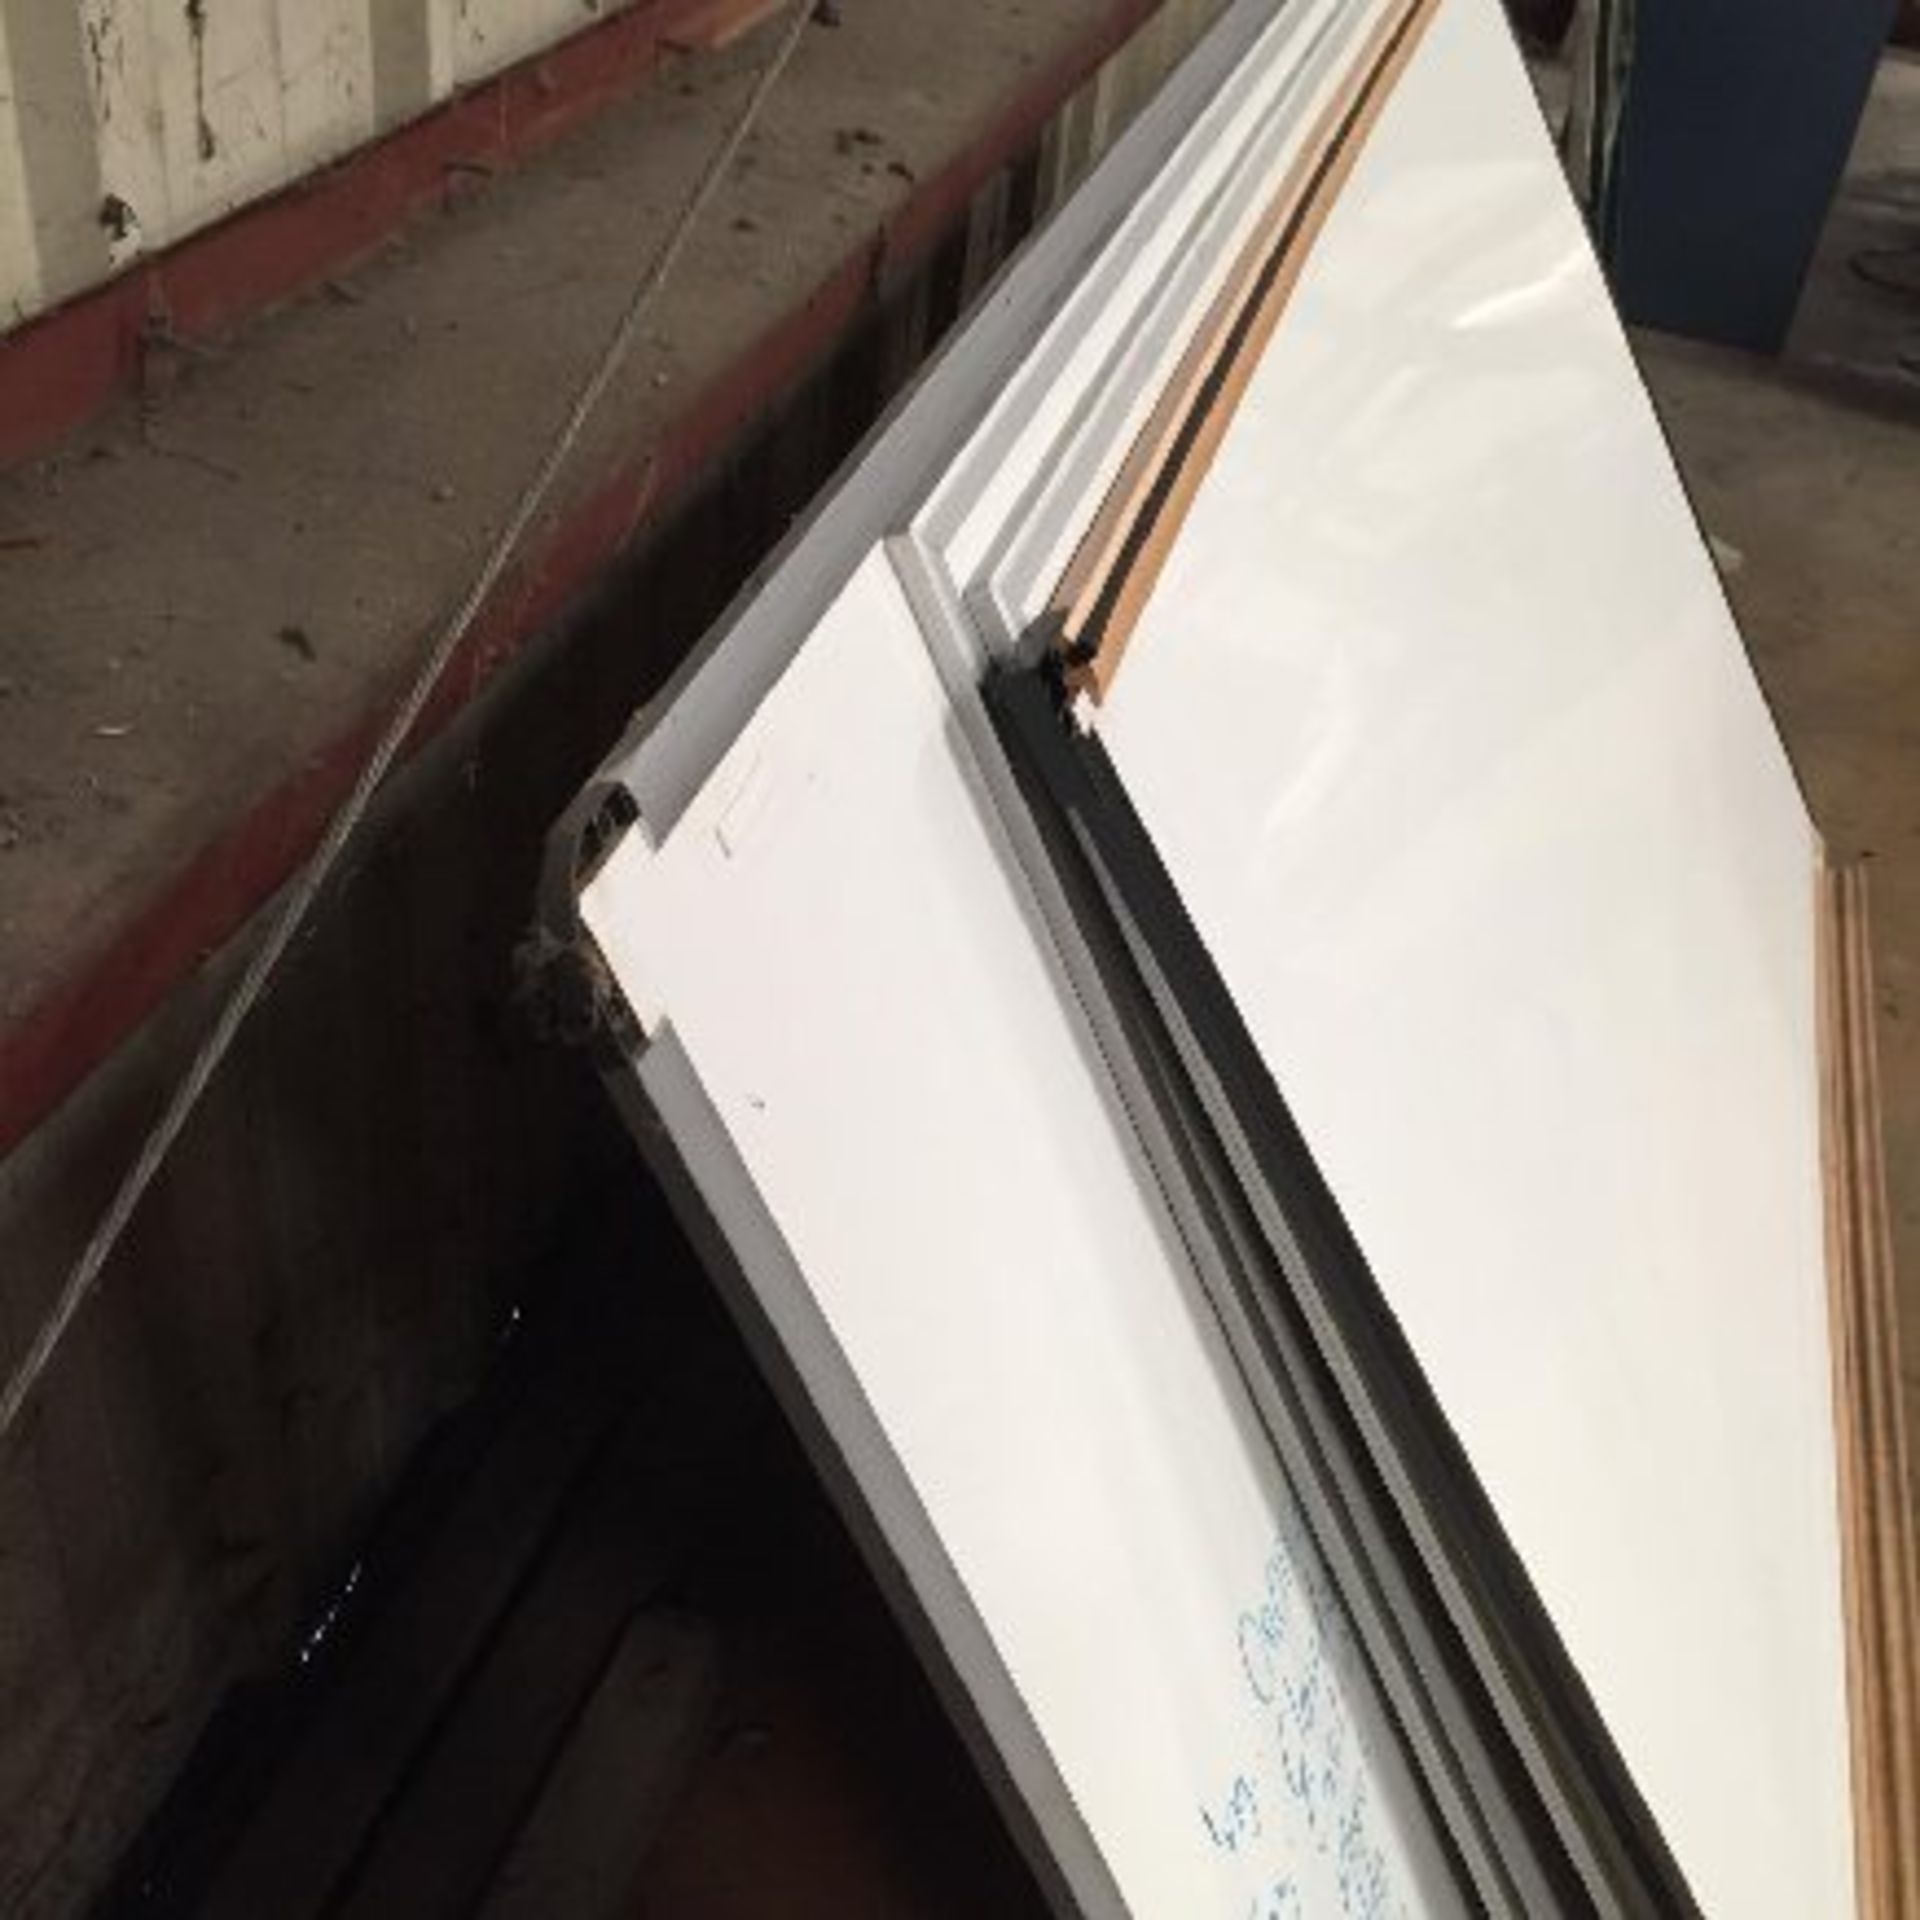 (5) Good condition Dry Erase boards, (4) boards that mount to a wall, (1) board that rolls on